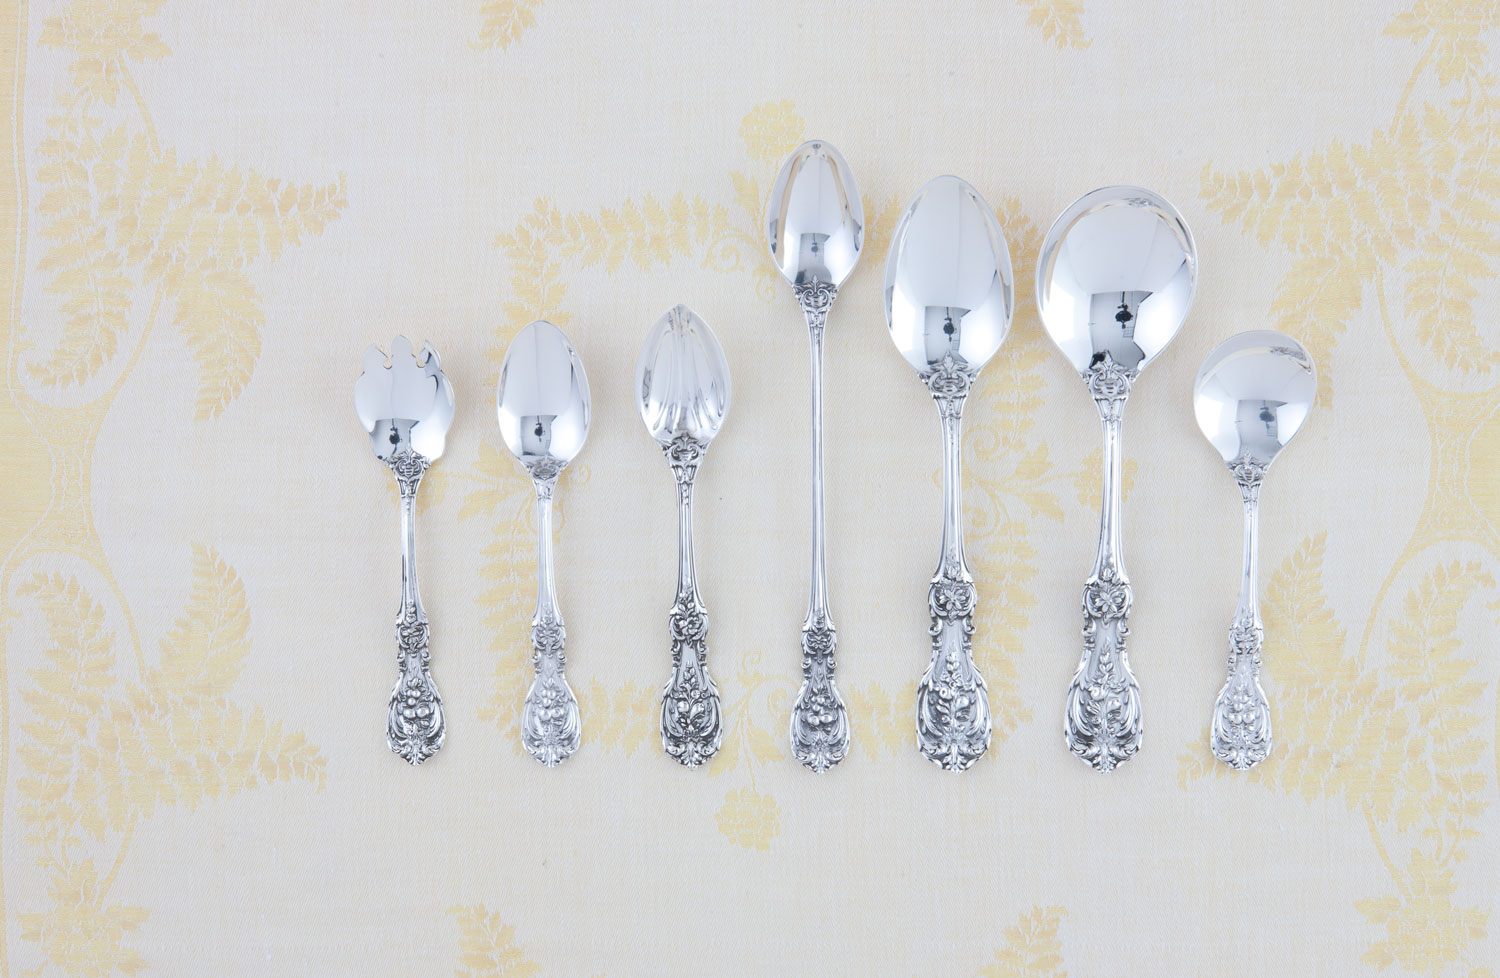 A picture of spoons for lessons in etiquette